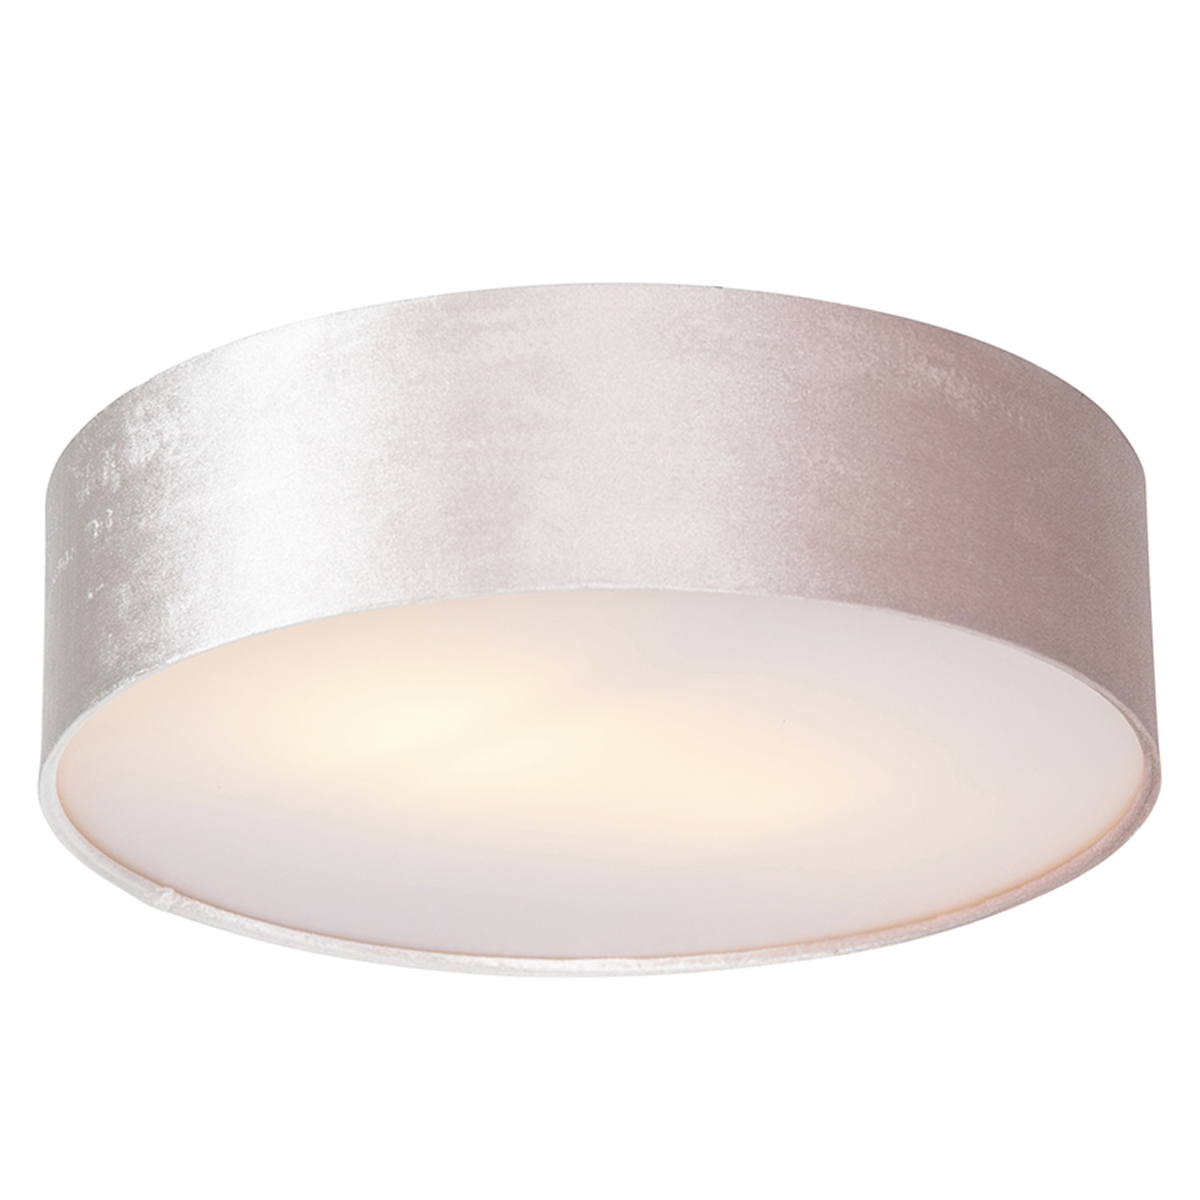 Ceiling lamp pink 40 cm with golden inside - Drum